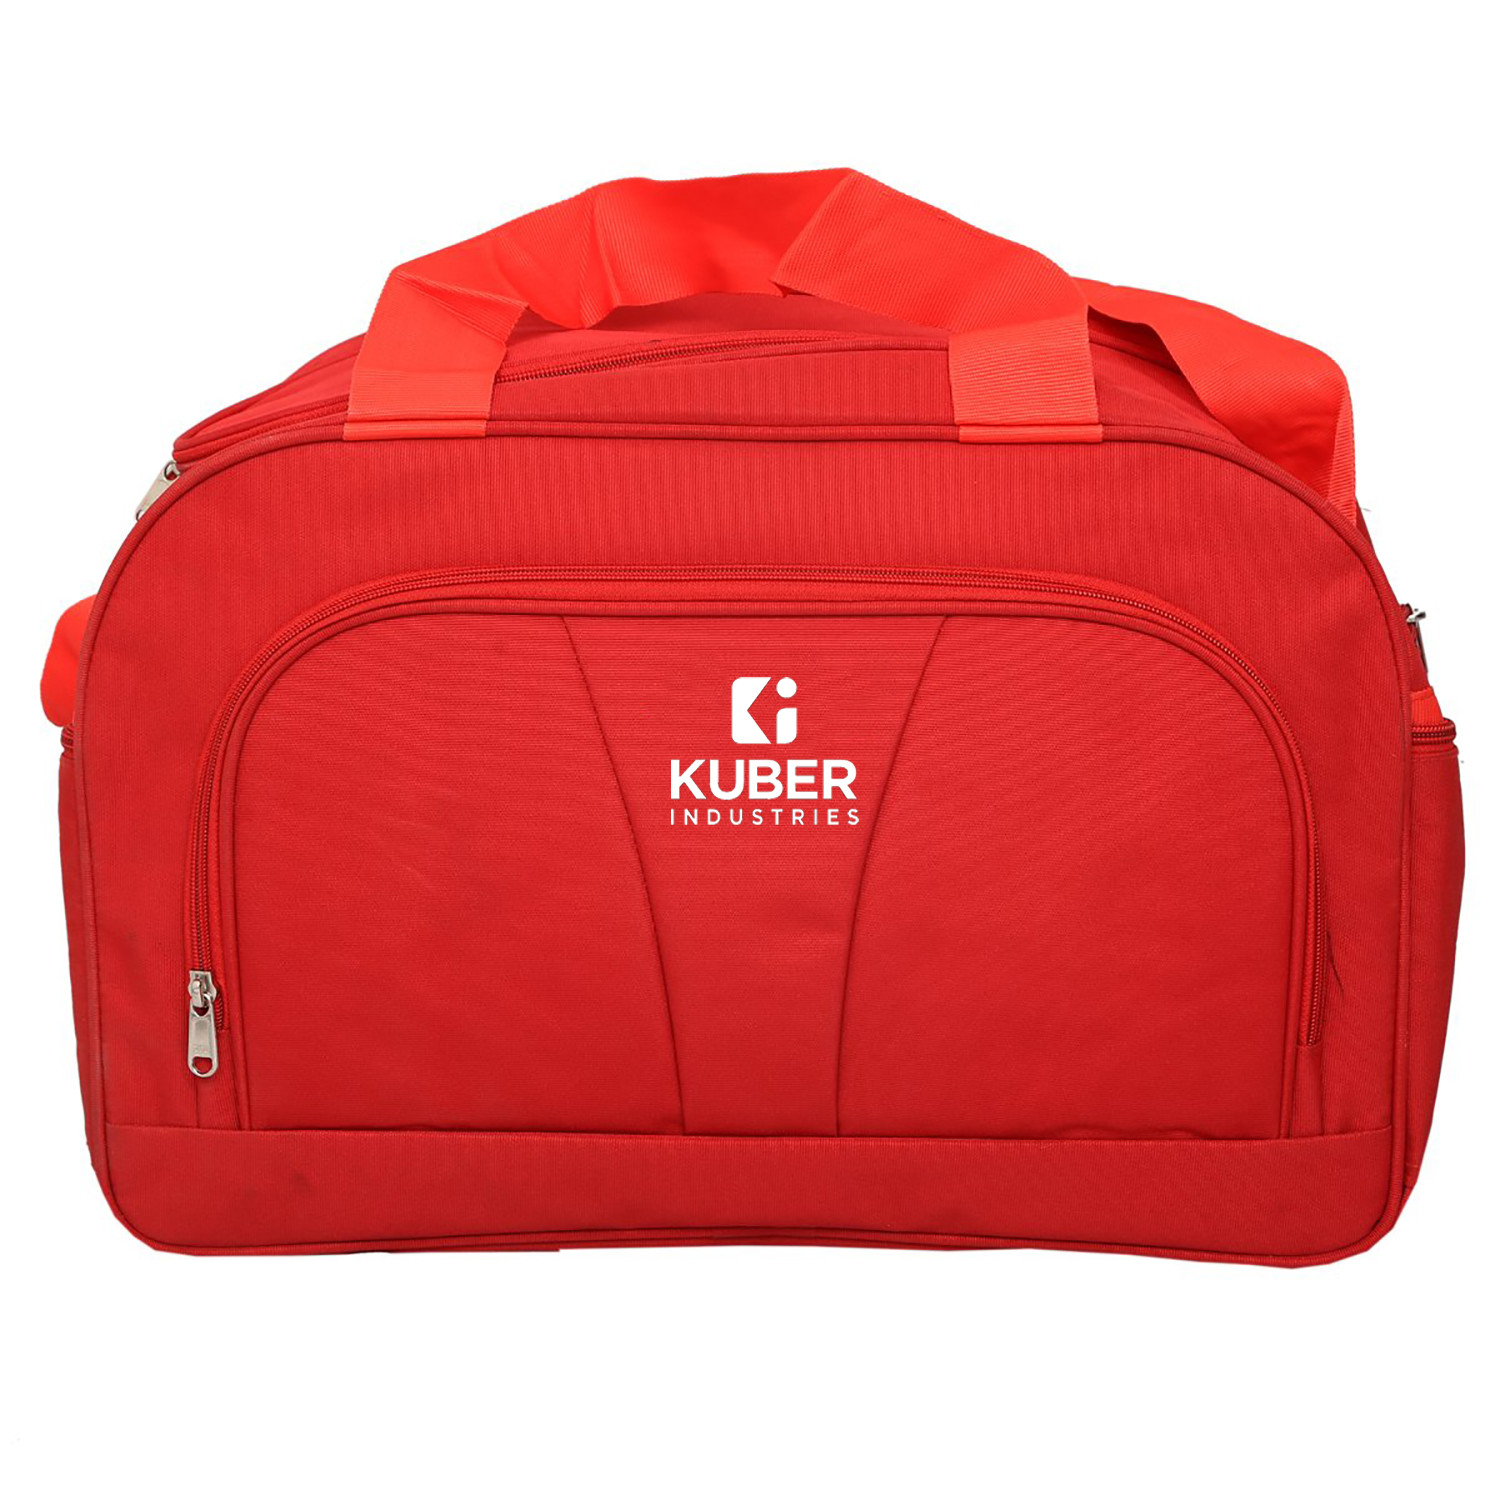 Kuber Industries Rexine Lightweight Travel Duffle Bag With Handle & 3 Outside Zipper Compartments,Large Capacity (Red)